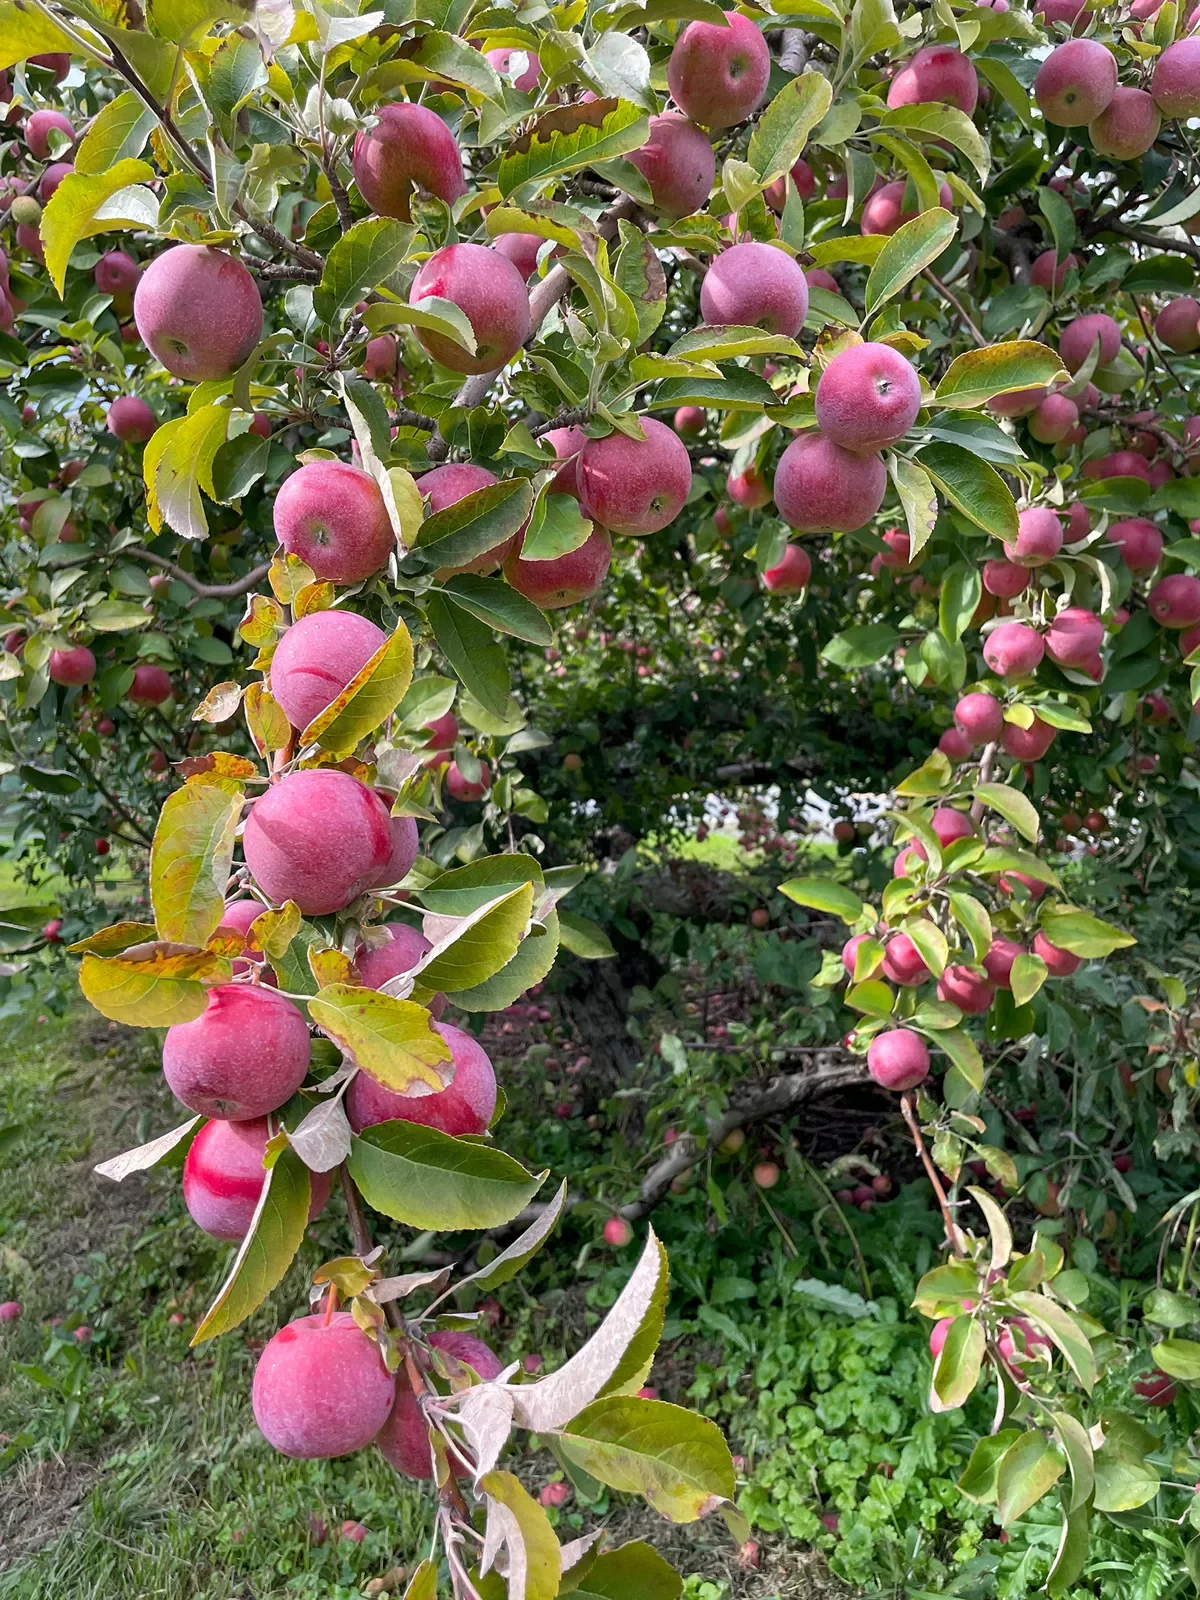 Apples dangling from branches of a tree